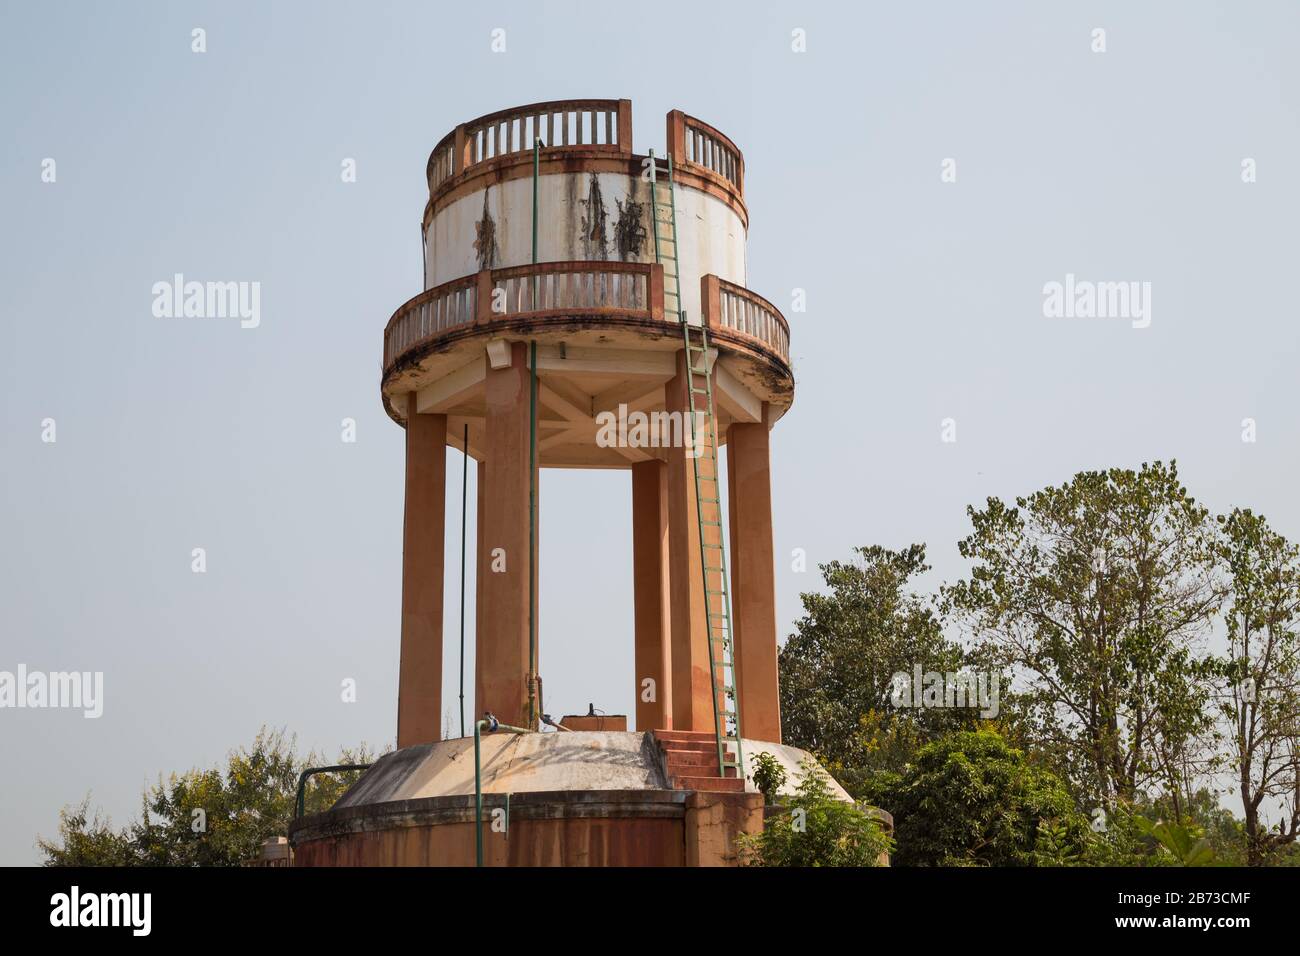 Reservoir tower in Bissau; high concrete infrastructure; Republic of Guinea-Bissau Stock Photo